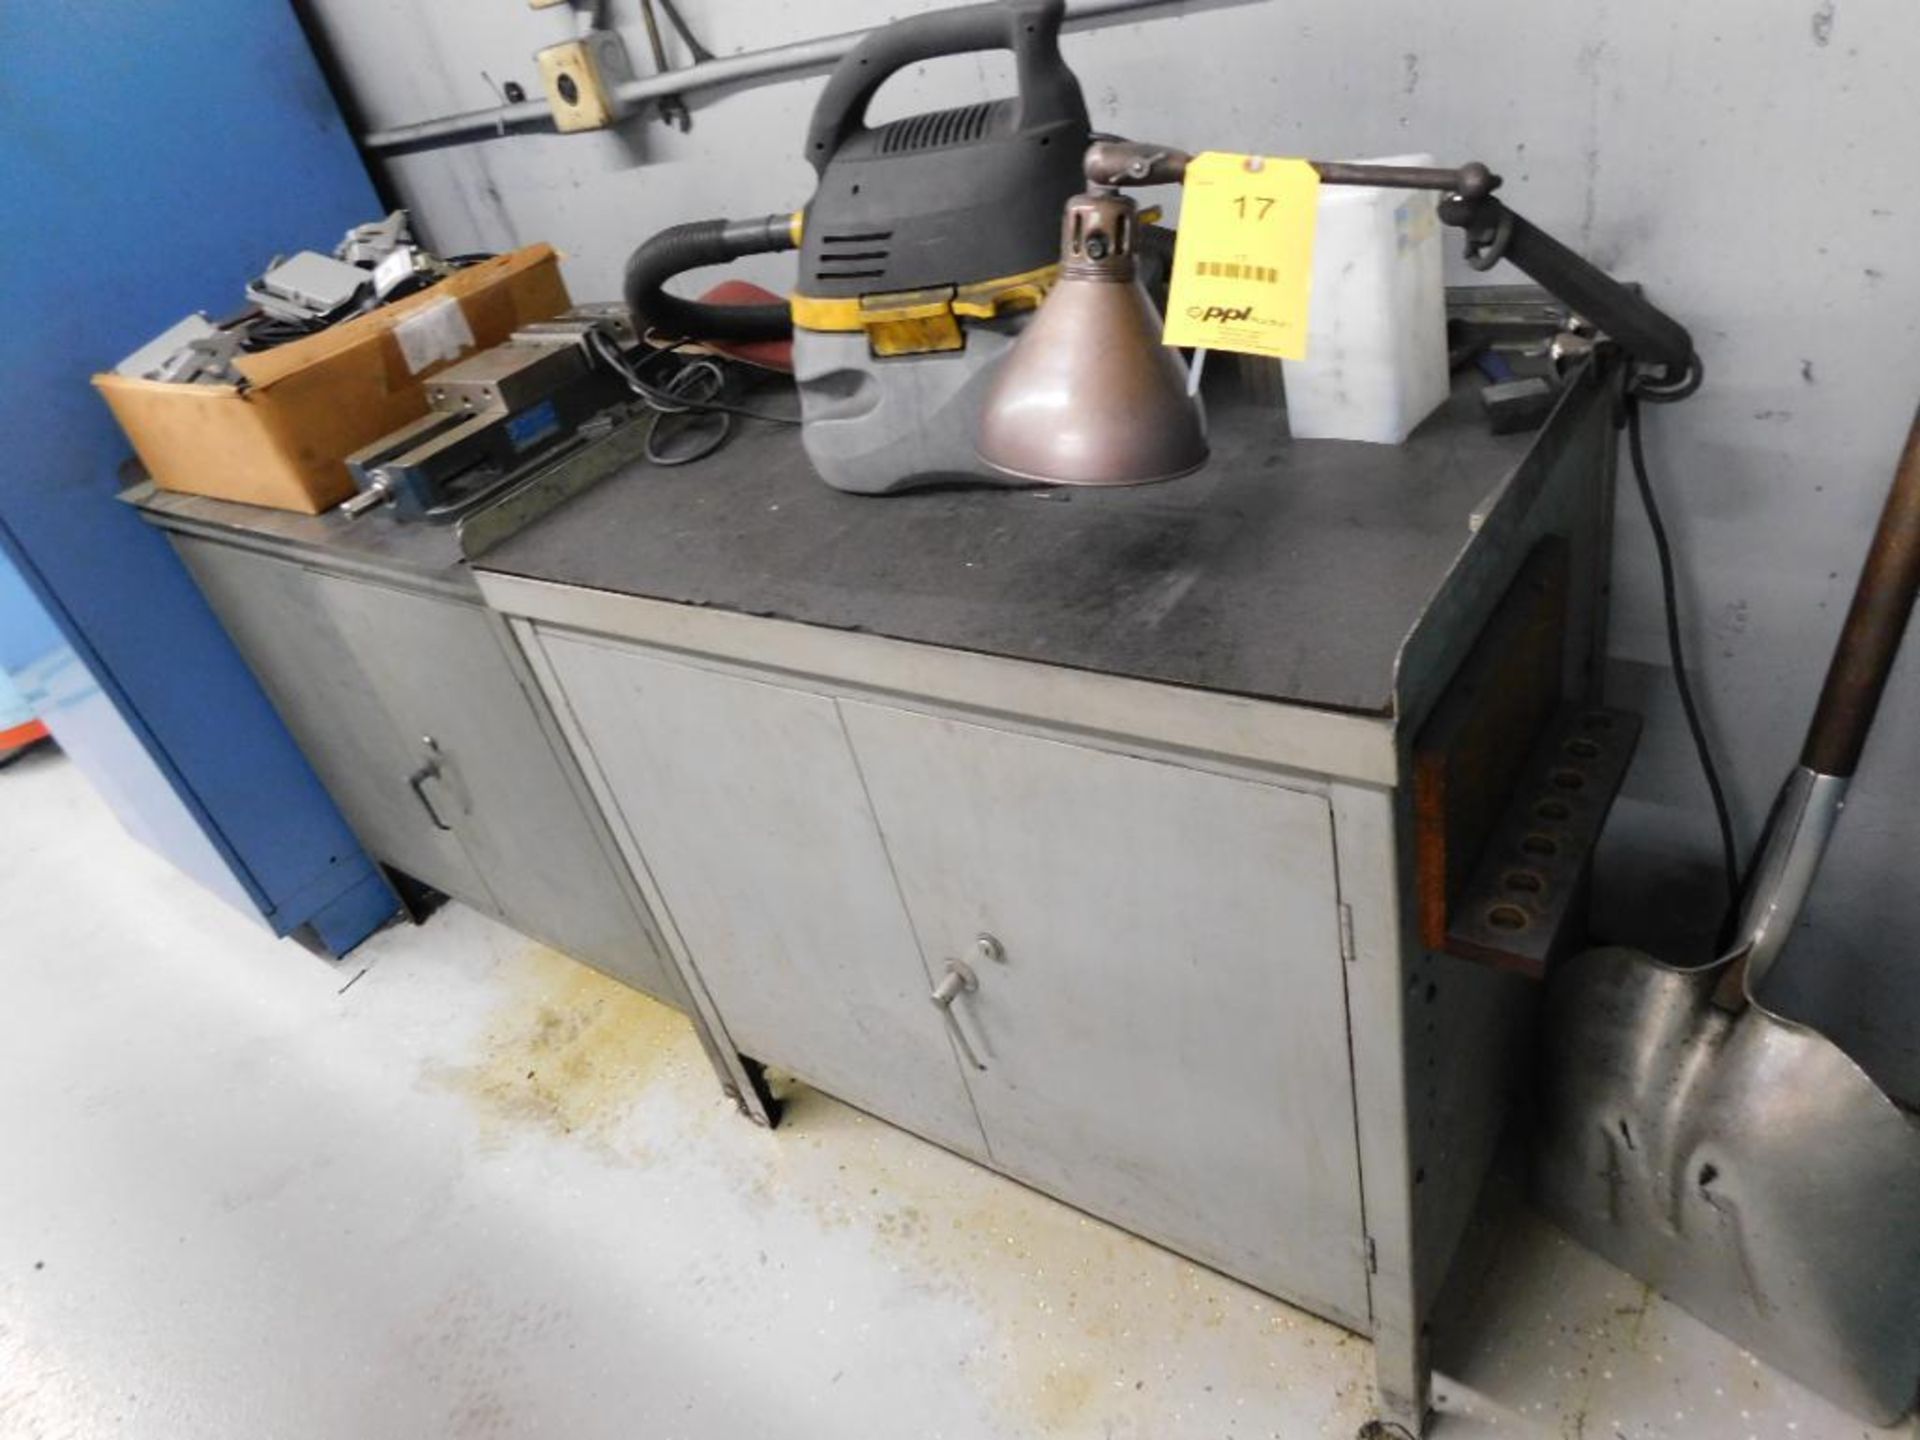 LOT: (2) Steel Cabinets with Contents of Manifold Control Cables, Repairable Kurt Vise & Articulated